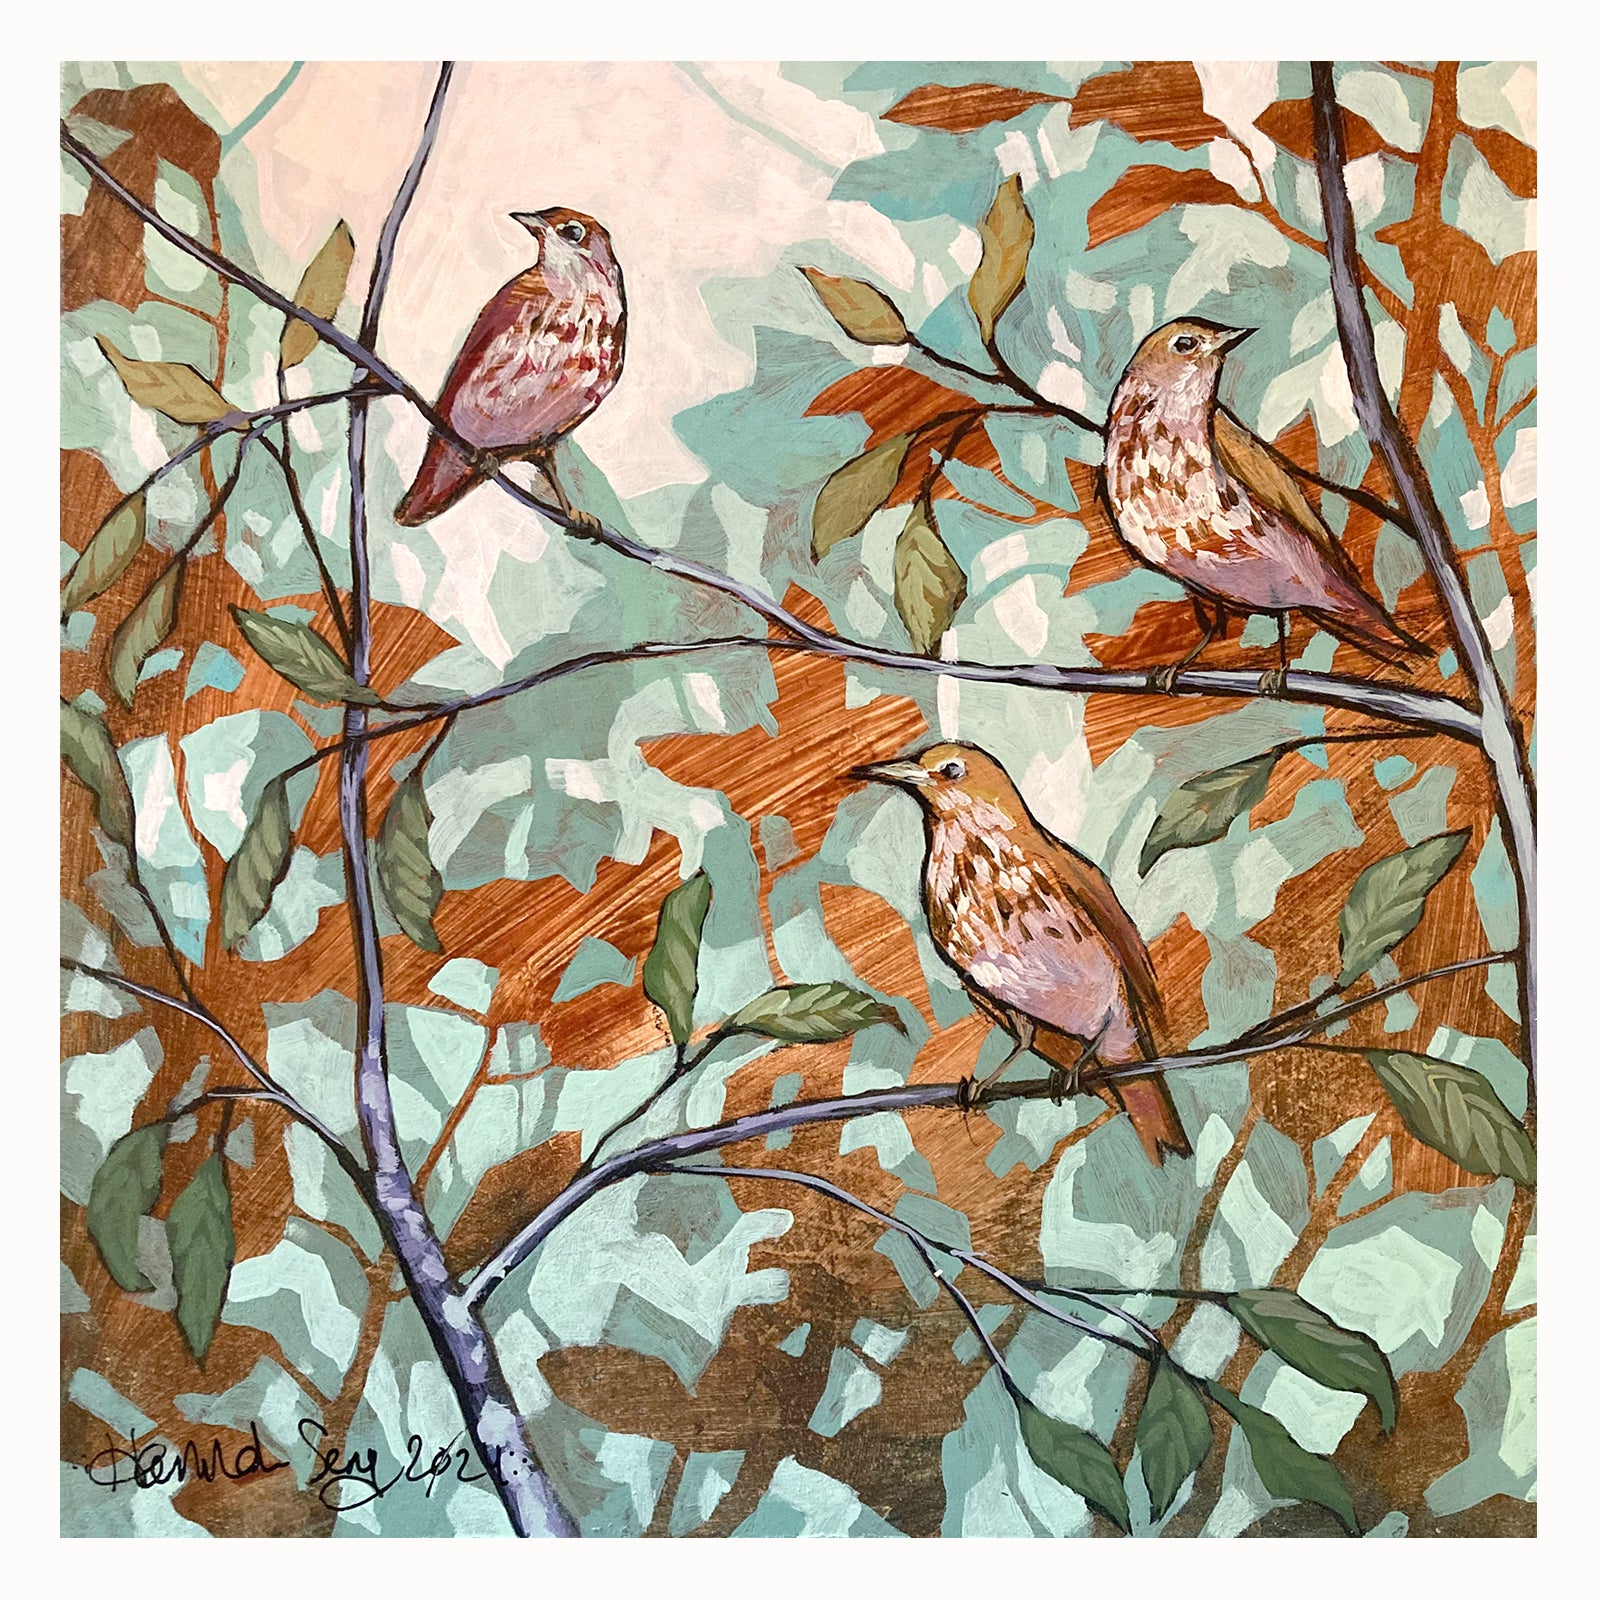 Hannah Seng nature inspired artwork at Lark & Key, Charlotte NC. Shop online or locally by appointment.